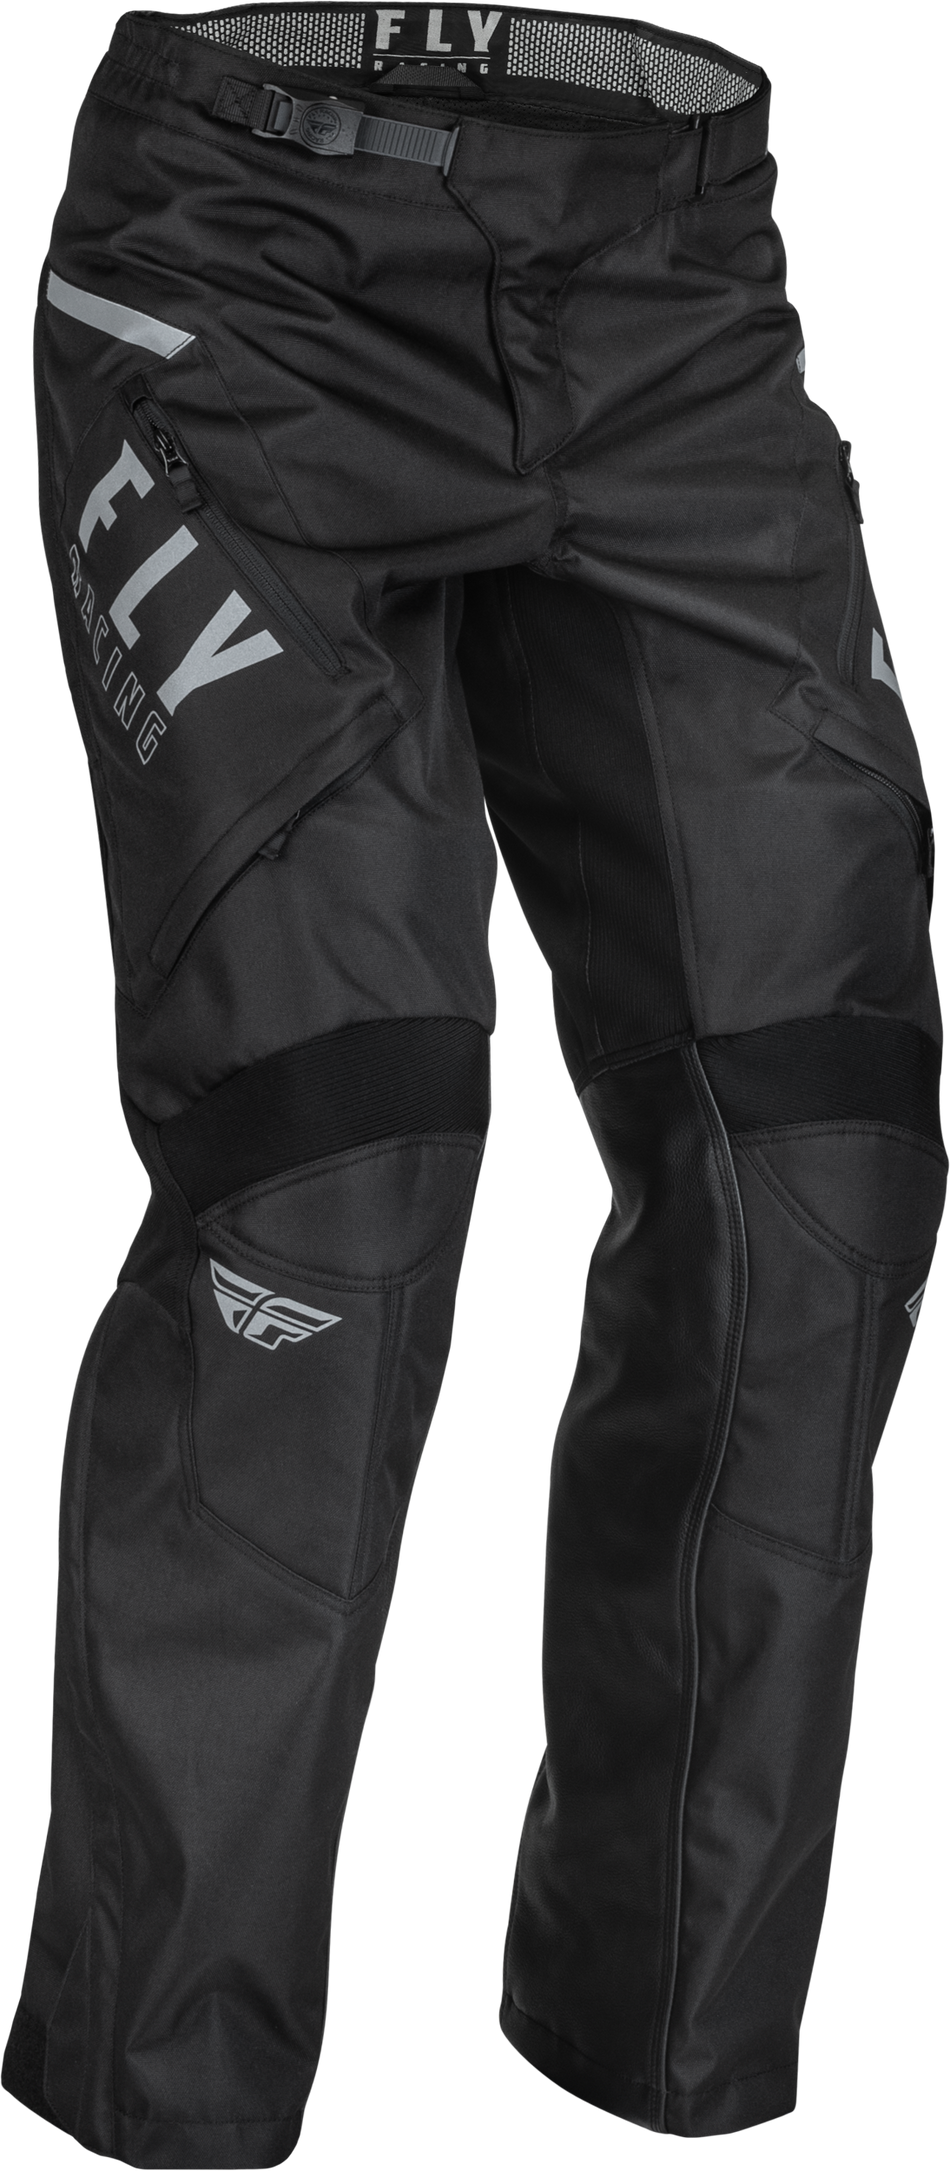 FLY RACING Patrol Over-Boot Pants Black/White Sz 40 376-64040